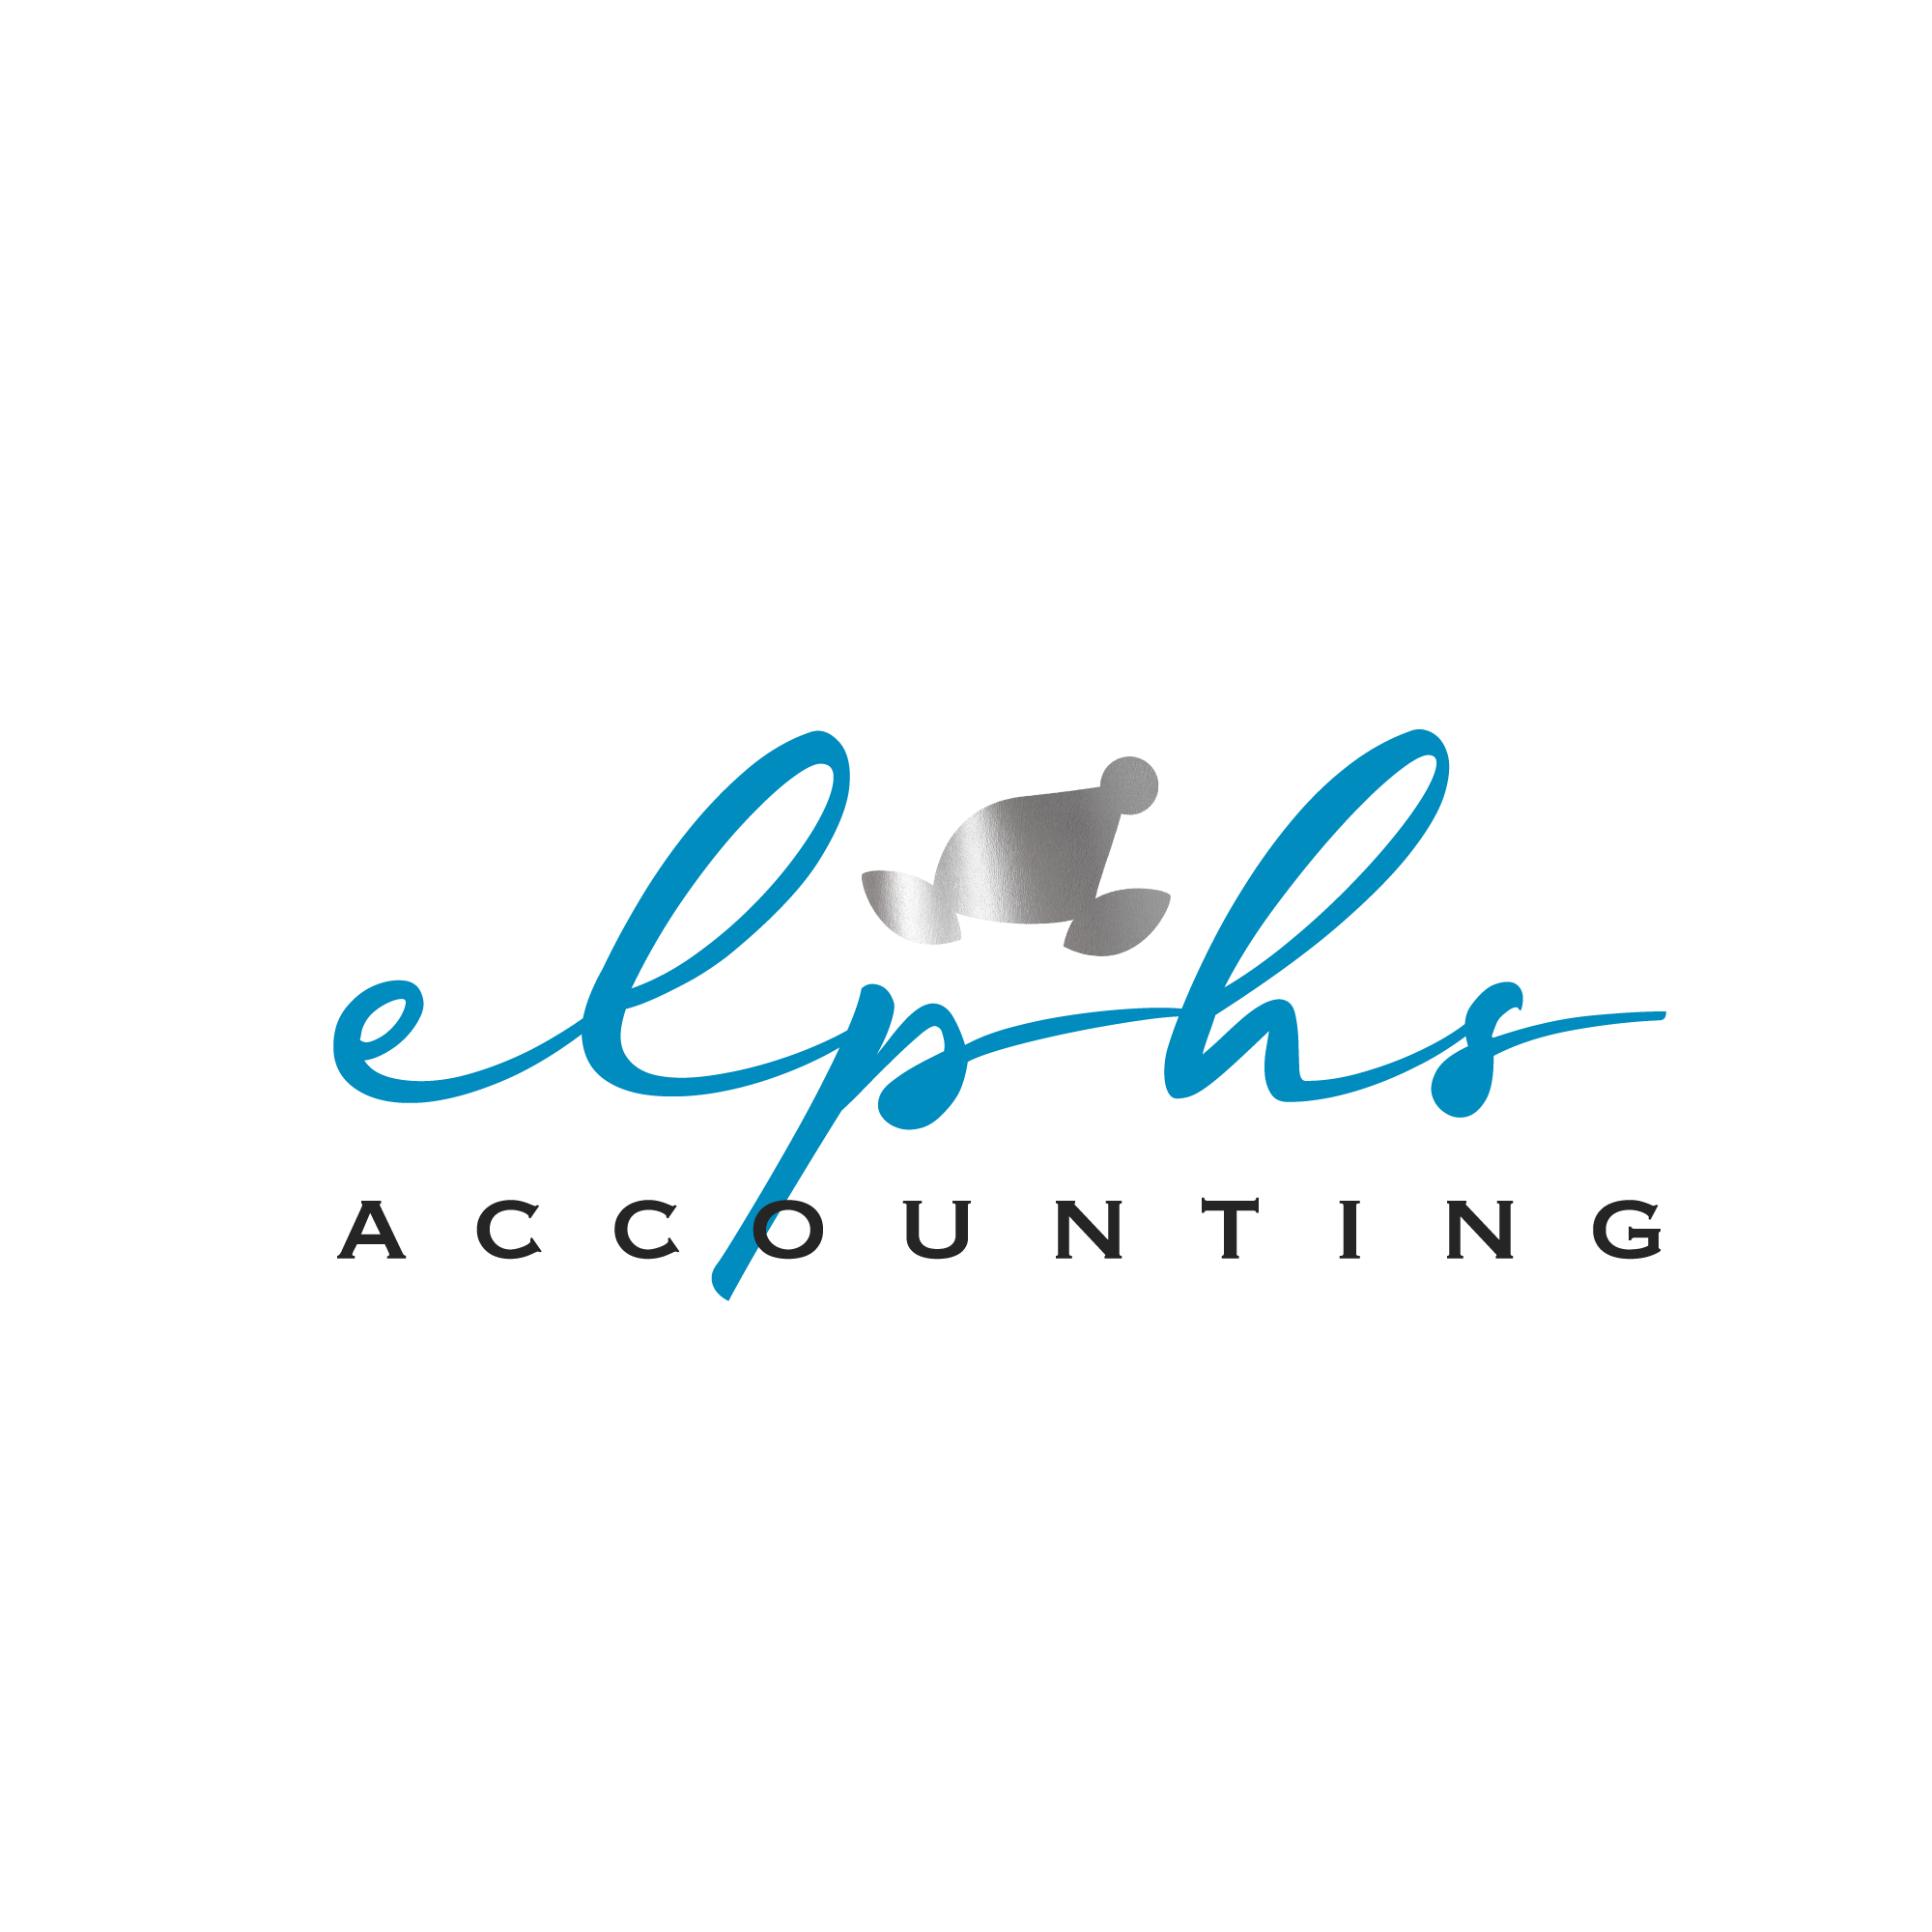 Elph's Accounting